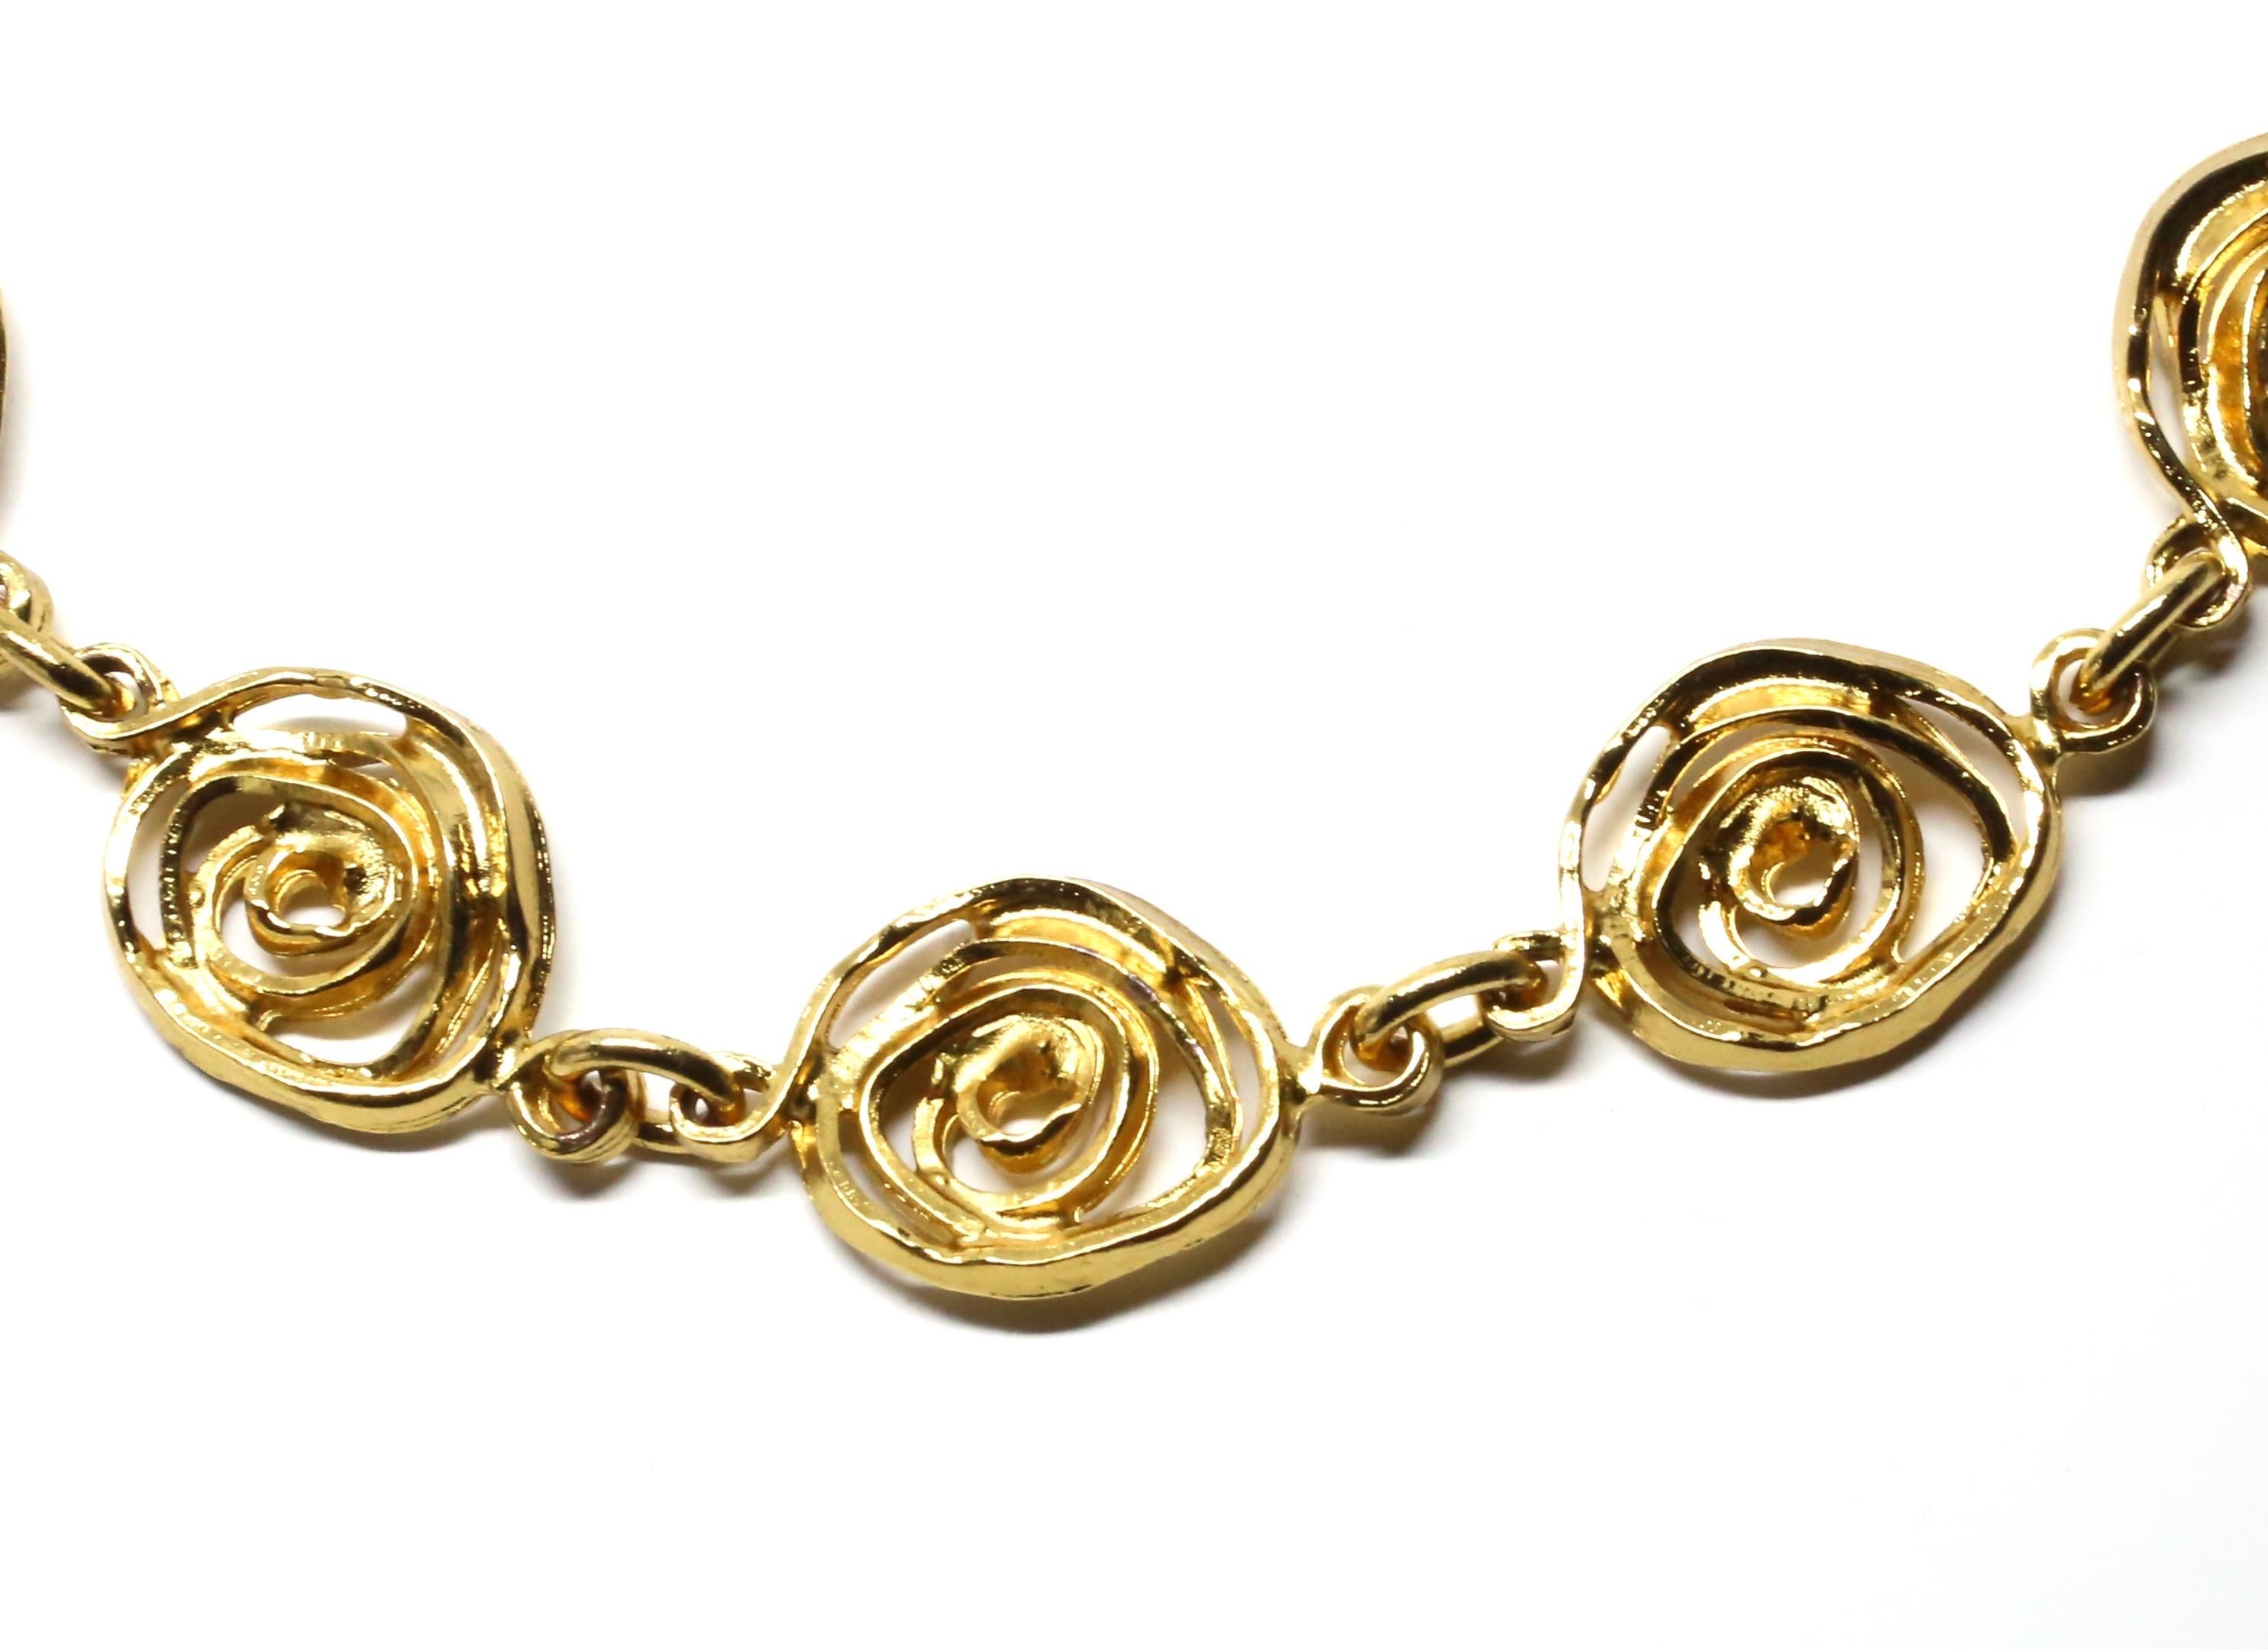 Gilt-metal necklace with abstract rose motif designed by by Yves Saint Laurent dating to the 1990's. Adjustable length from 18.5-20